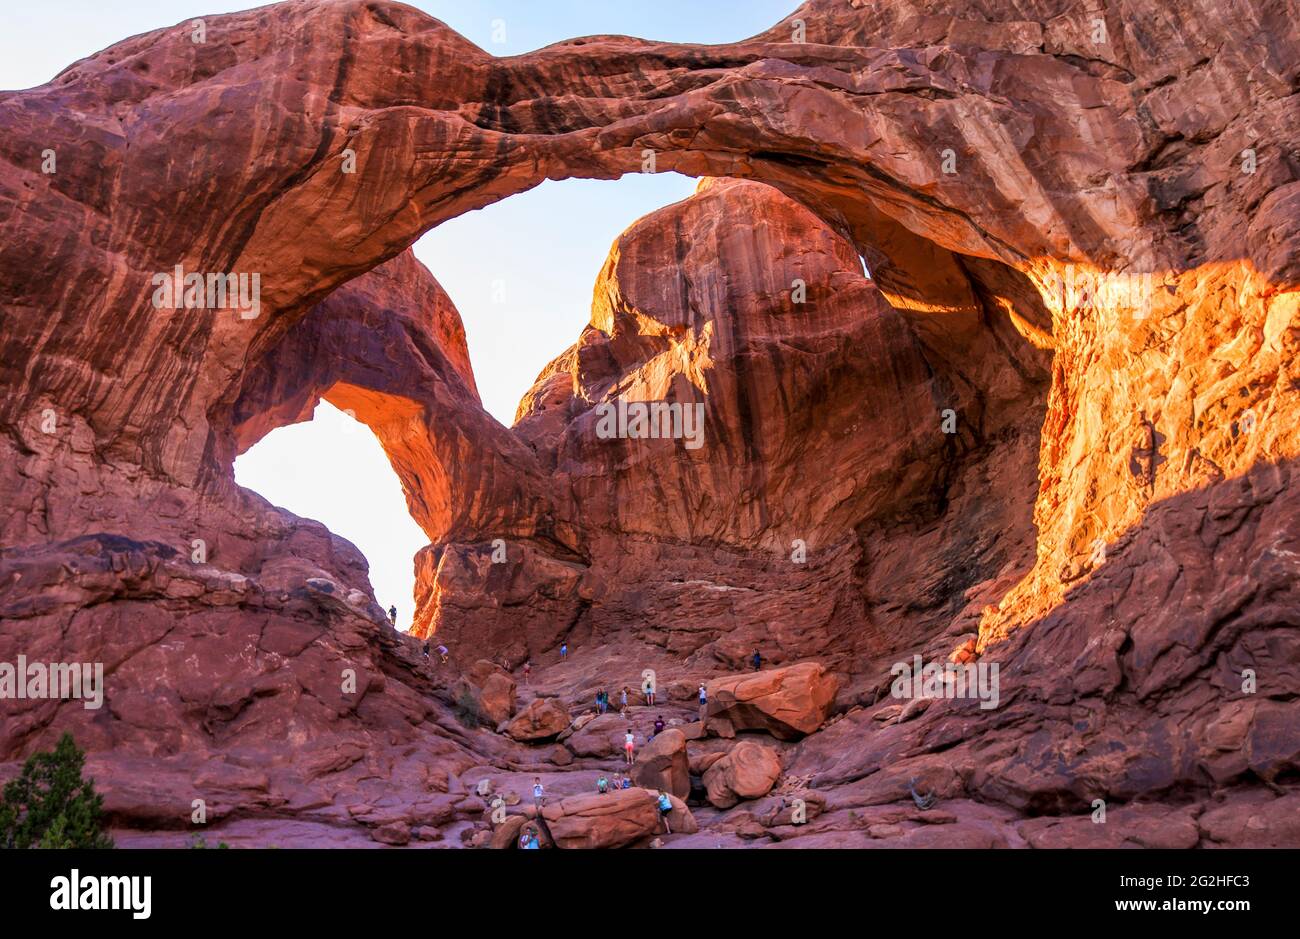 The famous Double Arch - a sandstone formation & popular photo spot with two big arches springing from the same side foundation - noted for front & back spans in Arches National Park, near Moab in Utah, USA Stock Photo